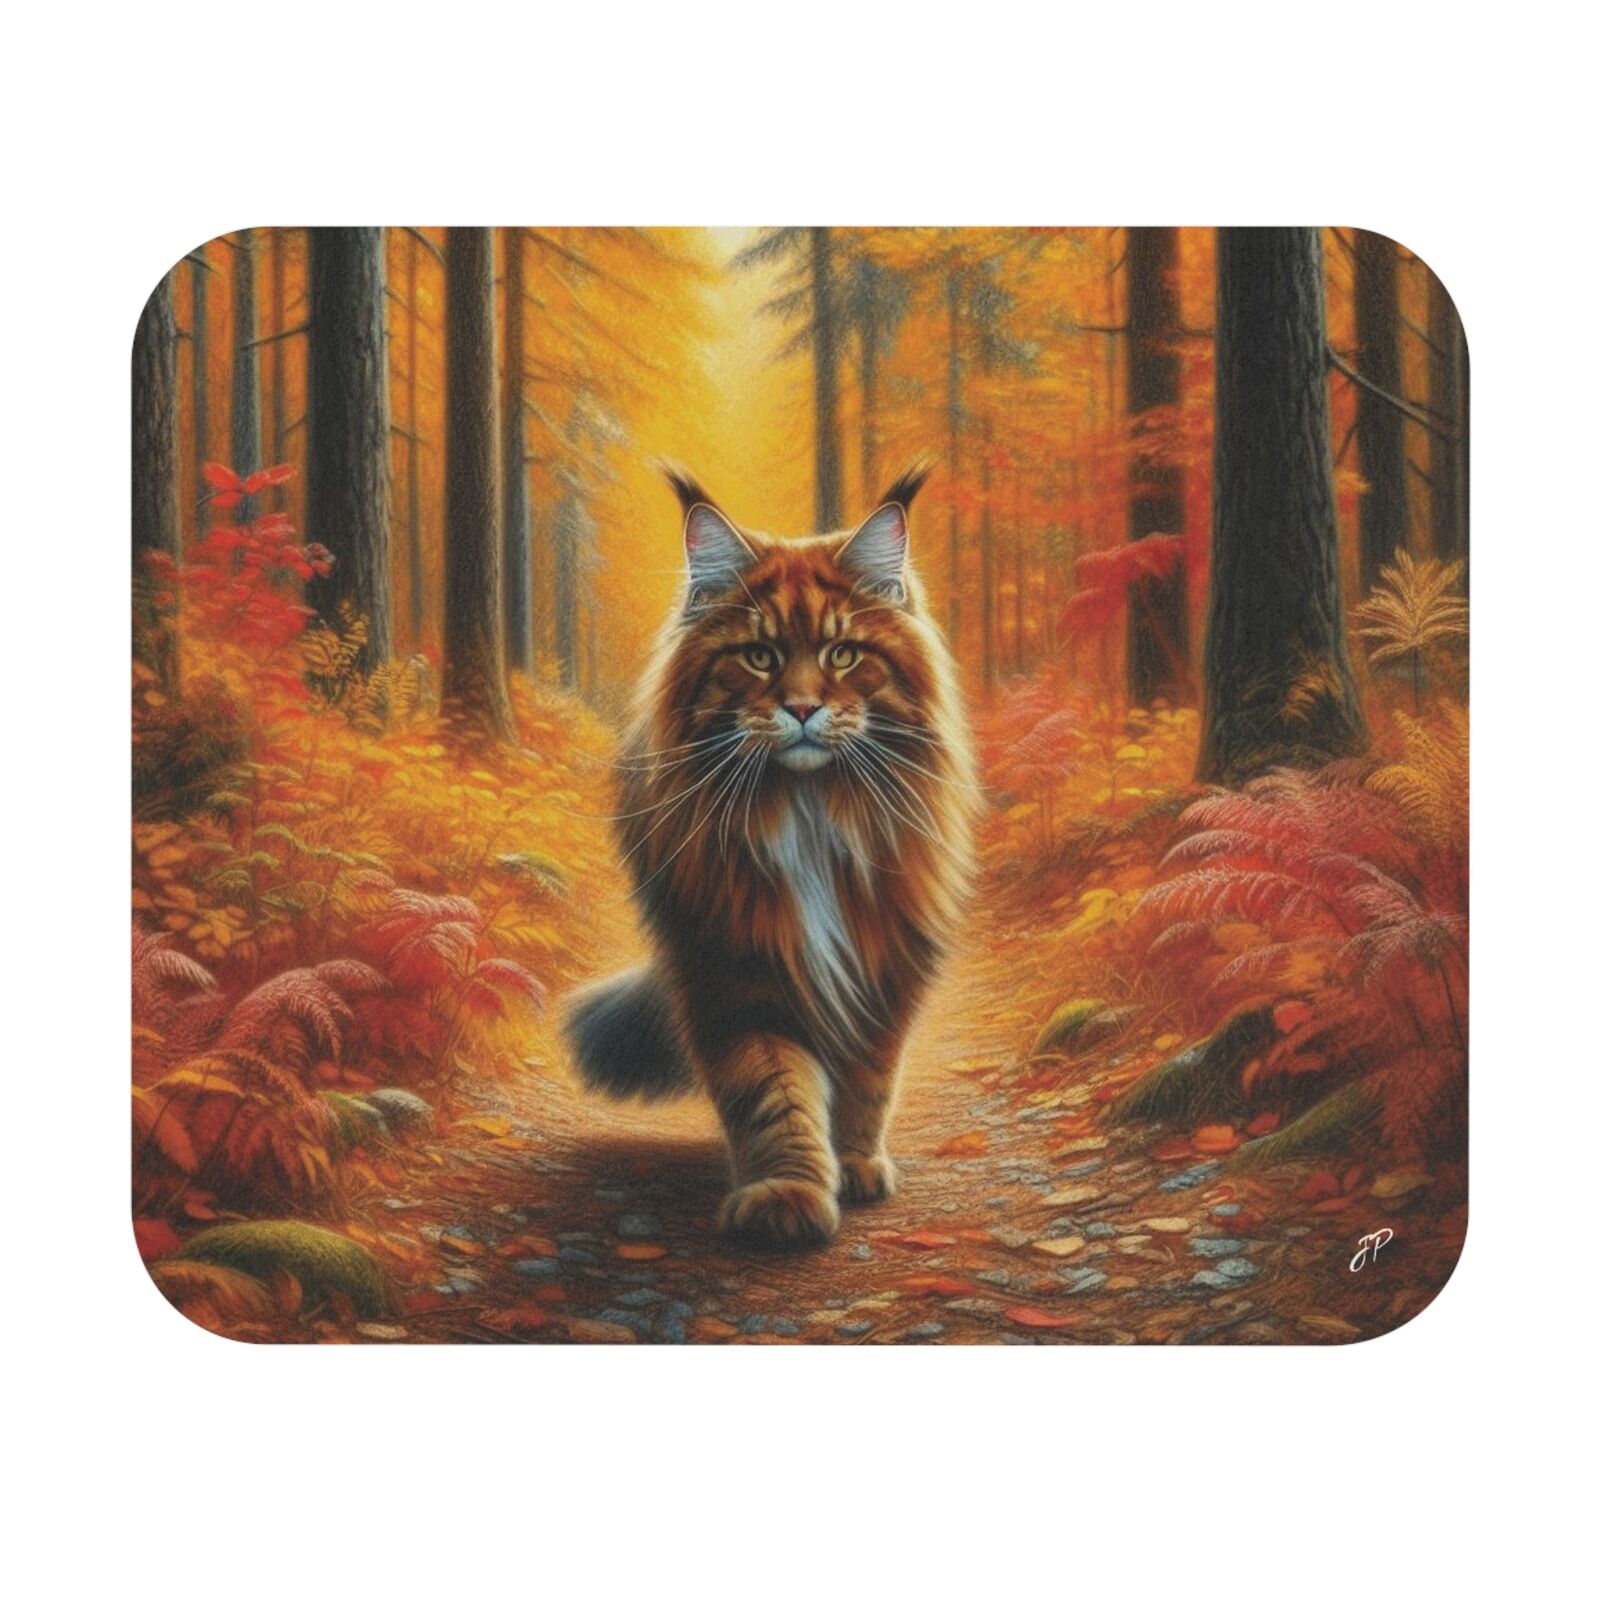 Computer Mouse Pad - Red Maine Coon Tabby Cat in the Fall